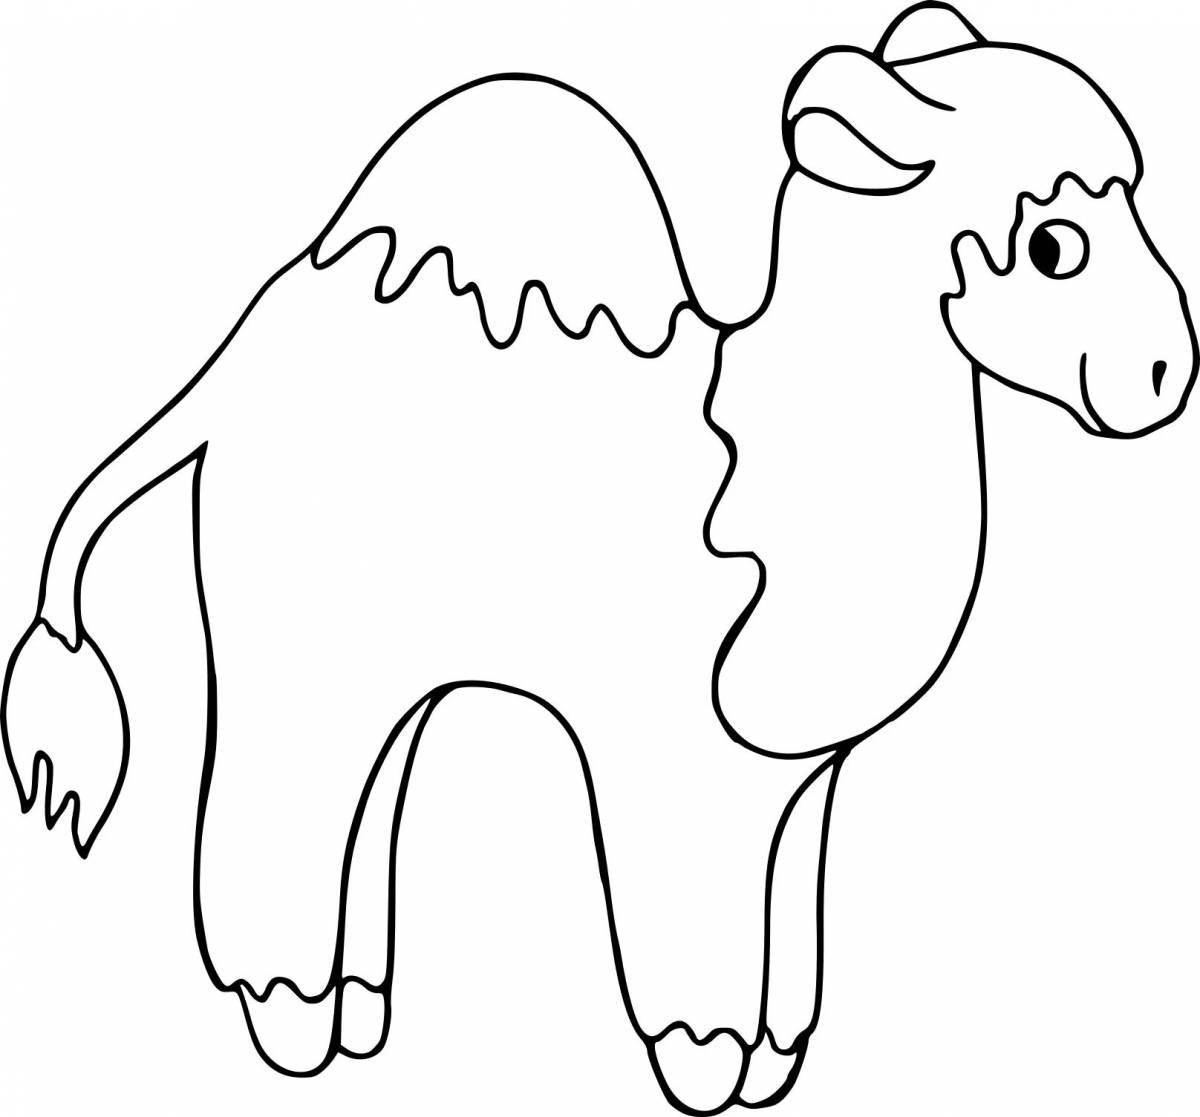 Adorable camel coloring page for children 6-7 years old